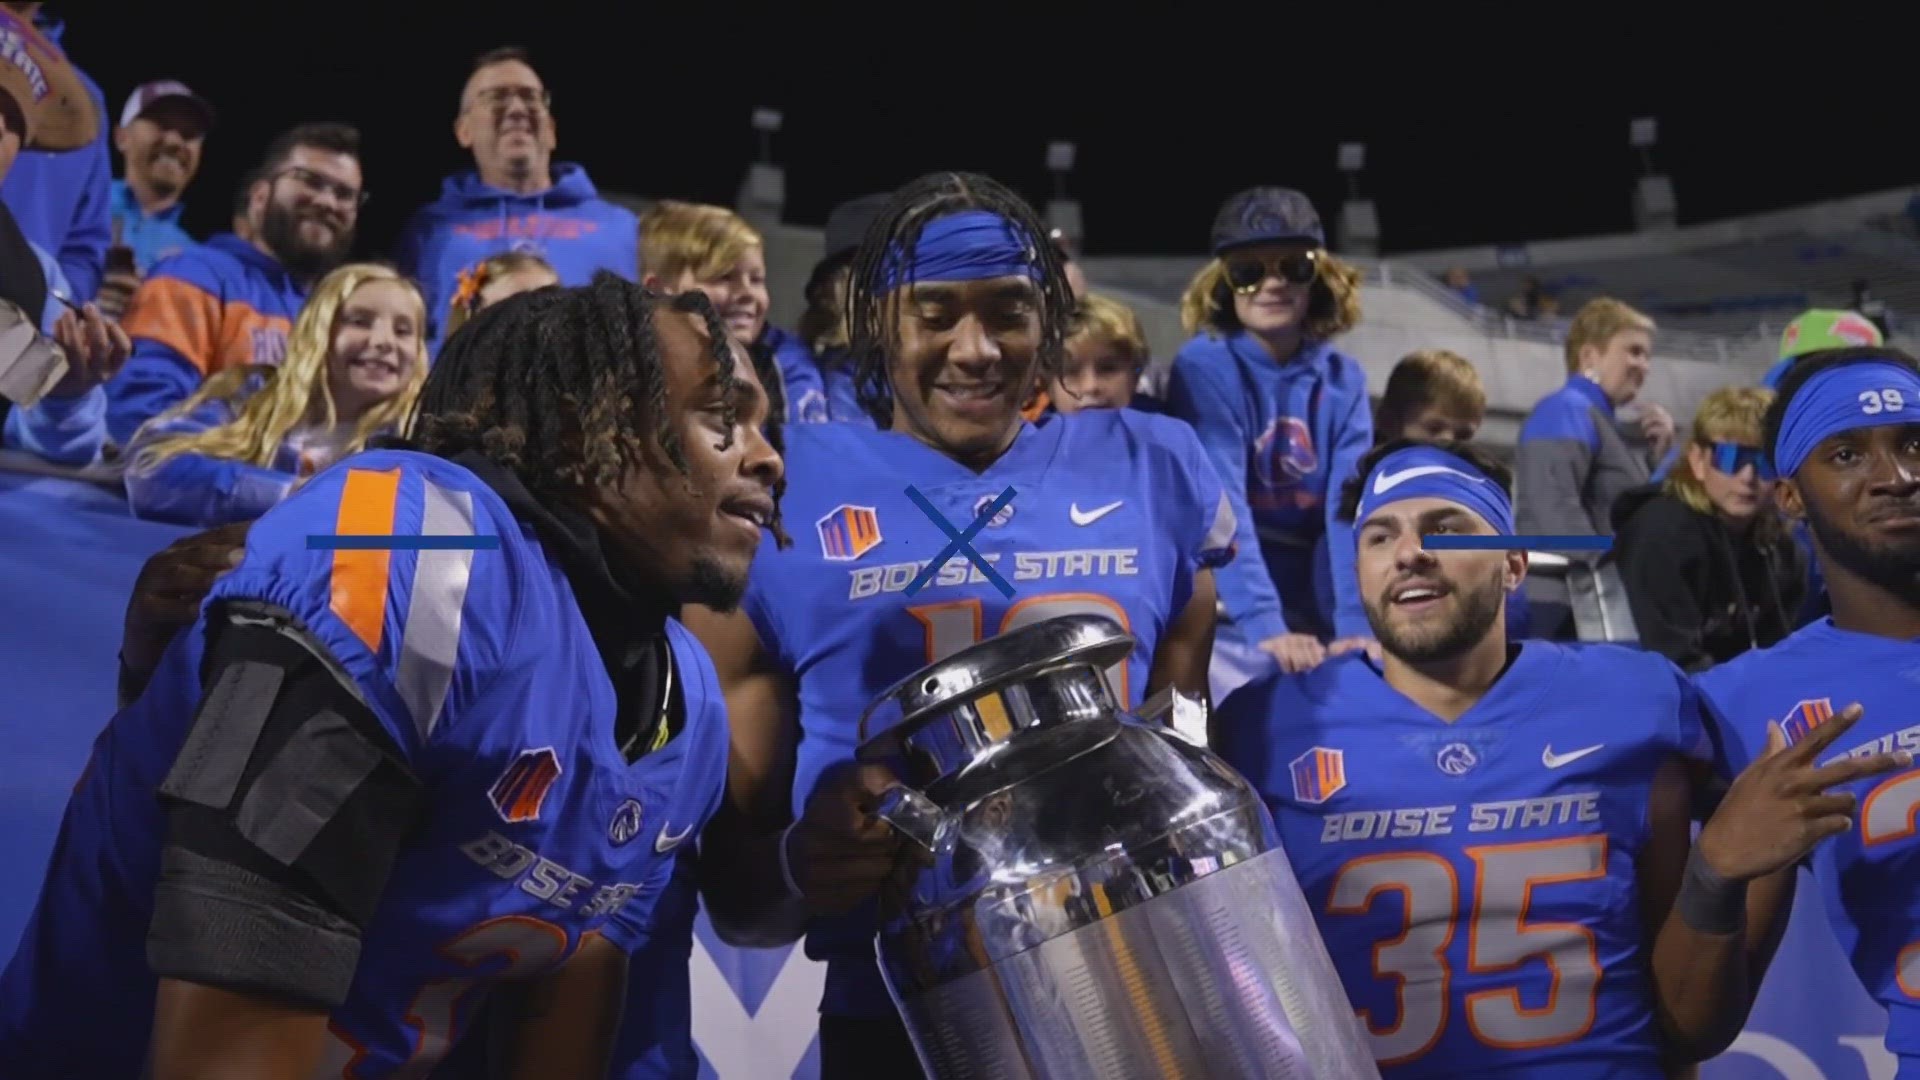 Boise State looks to avenge last season's loss to Fresno State in the Mountain West title game and keep hold of the Milk Can on Saturday night.